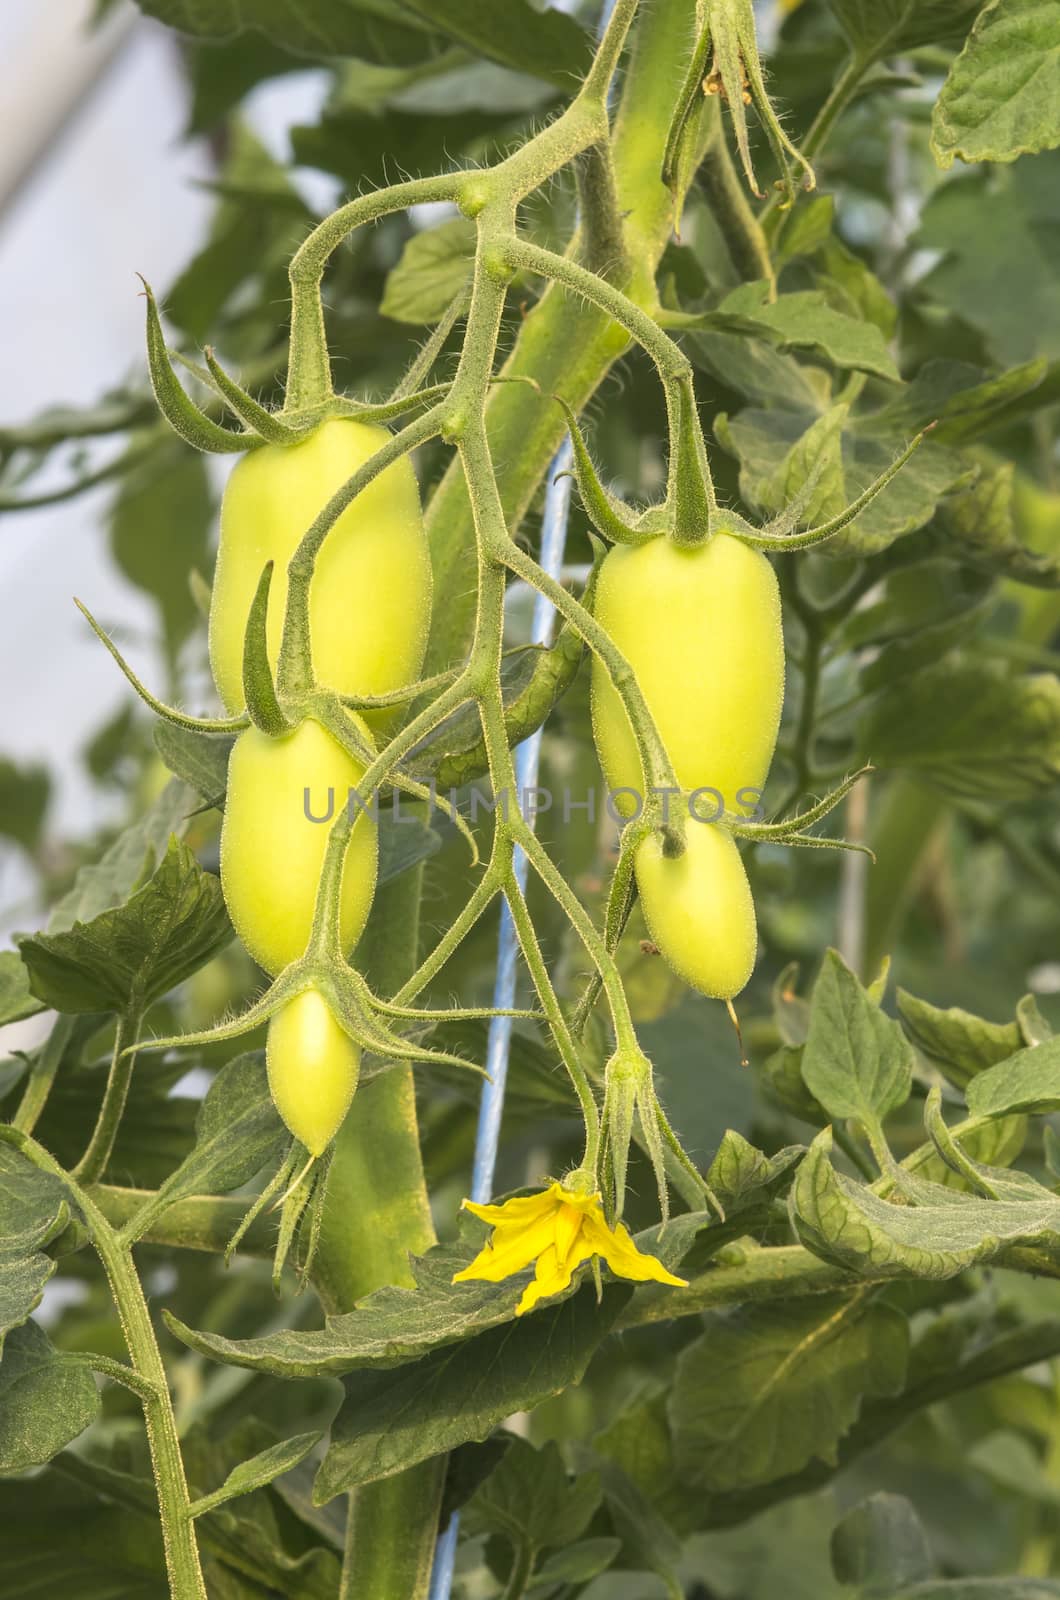 Tomato plant details: fruit and flower, close image